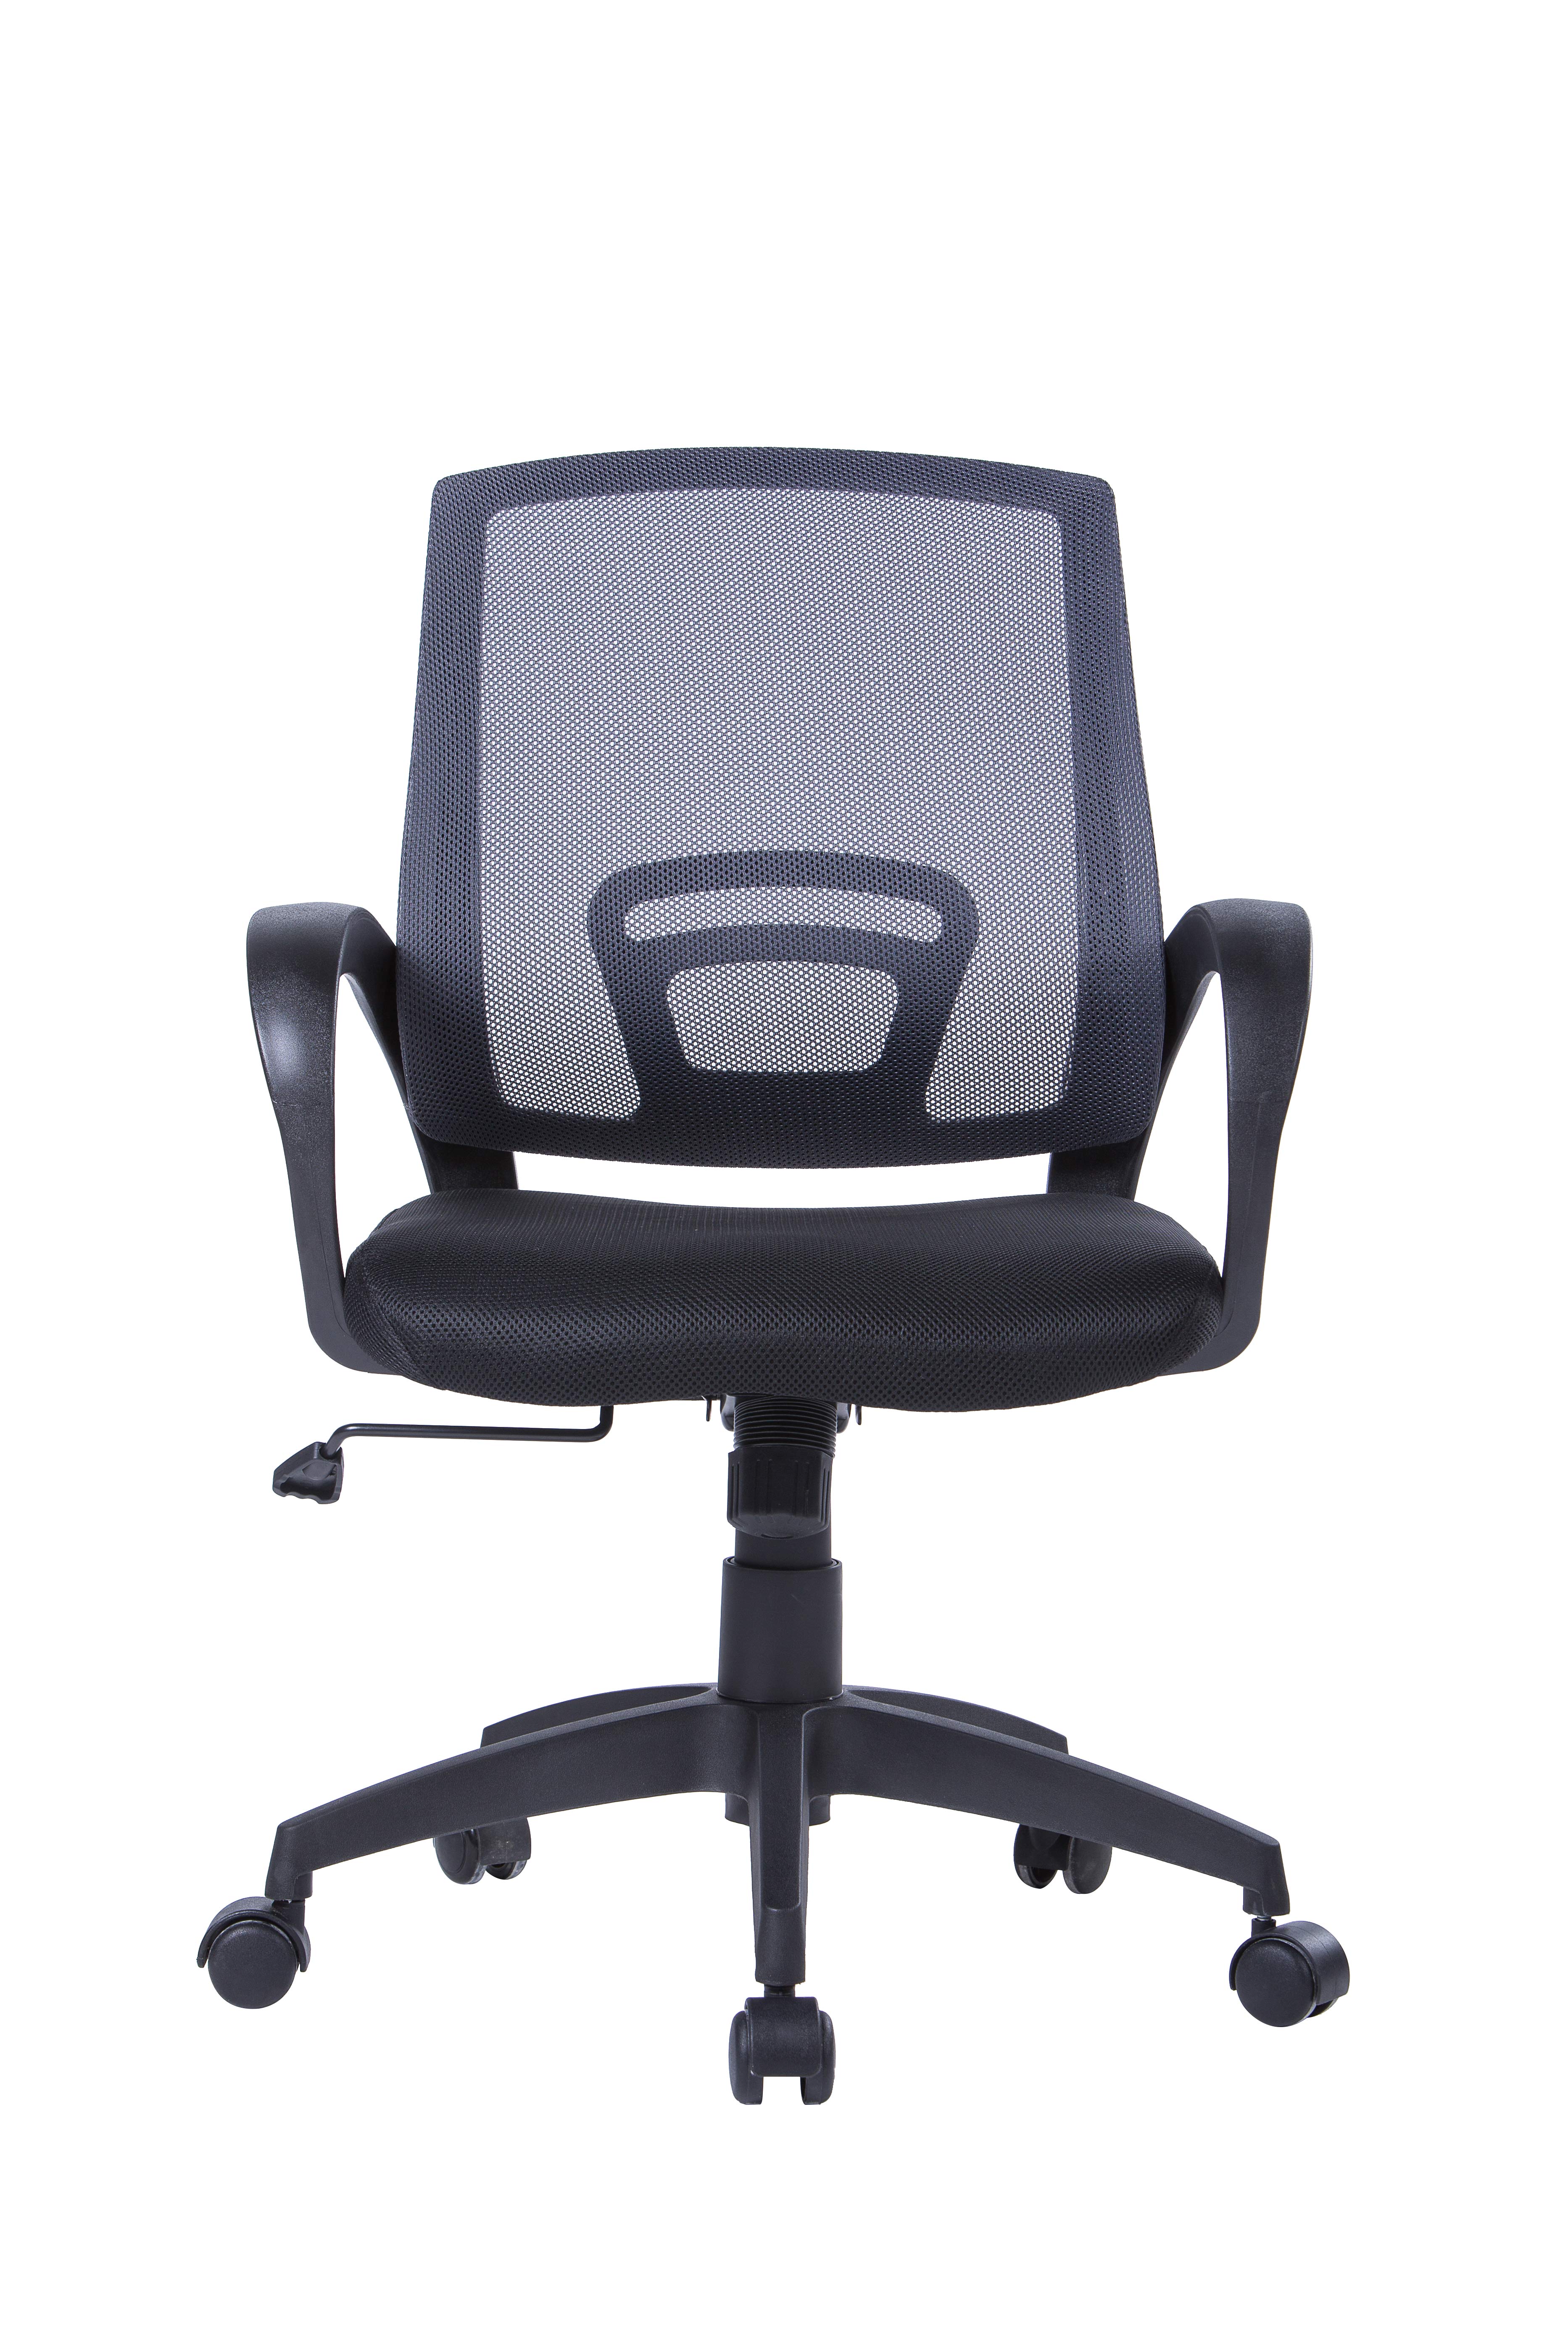 W-120S Modern Office Rotating Chair